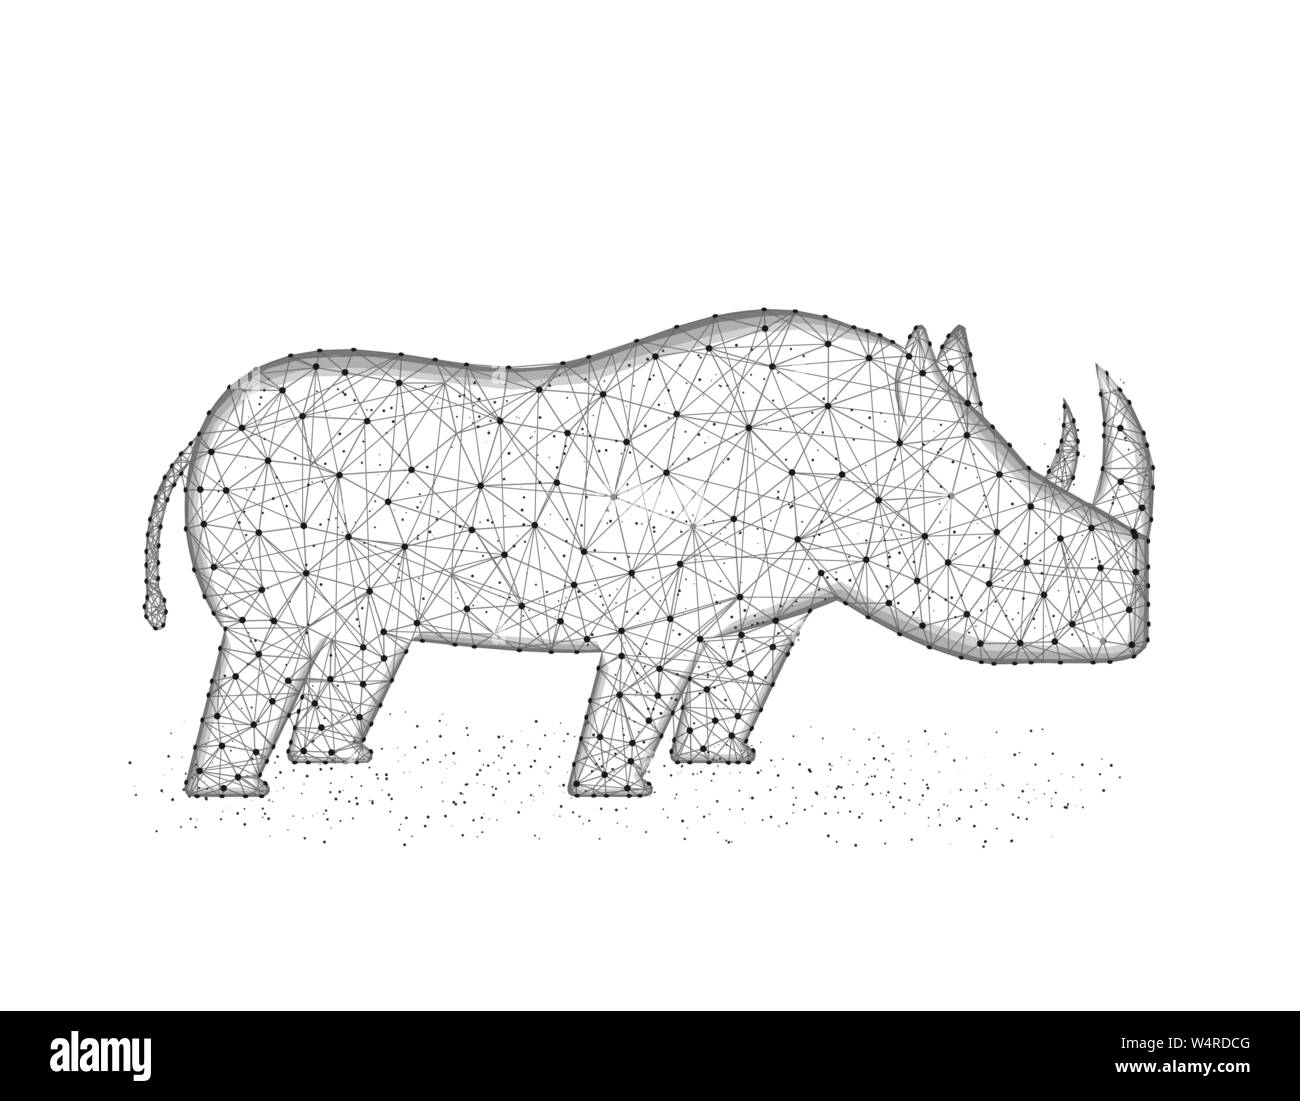 Rhinoceros low poly design, African animal abstract graphics, solitary mammals polygonal wireframe vector illustration made from points and lines on a Stock Vector